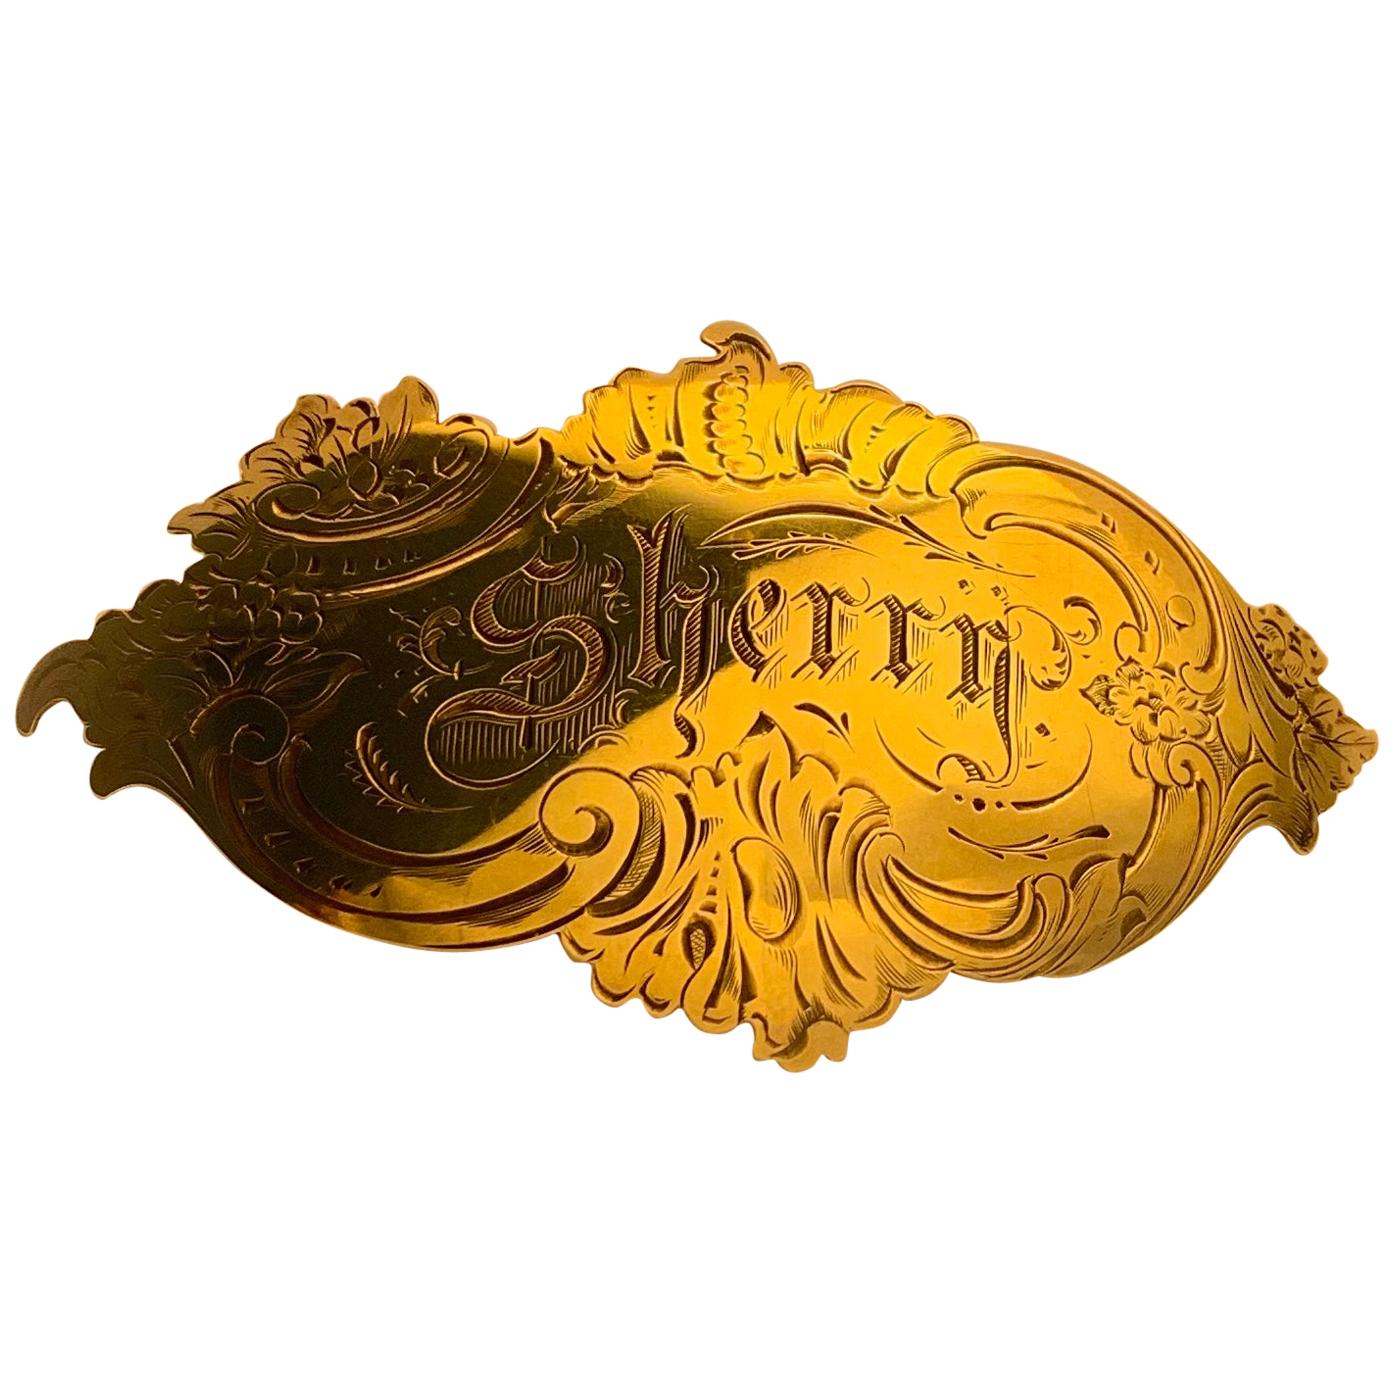 Decanter Label for Sherry in Solid Gold from Mid-19th Century For Sale